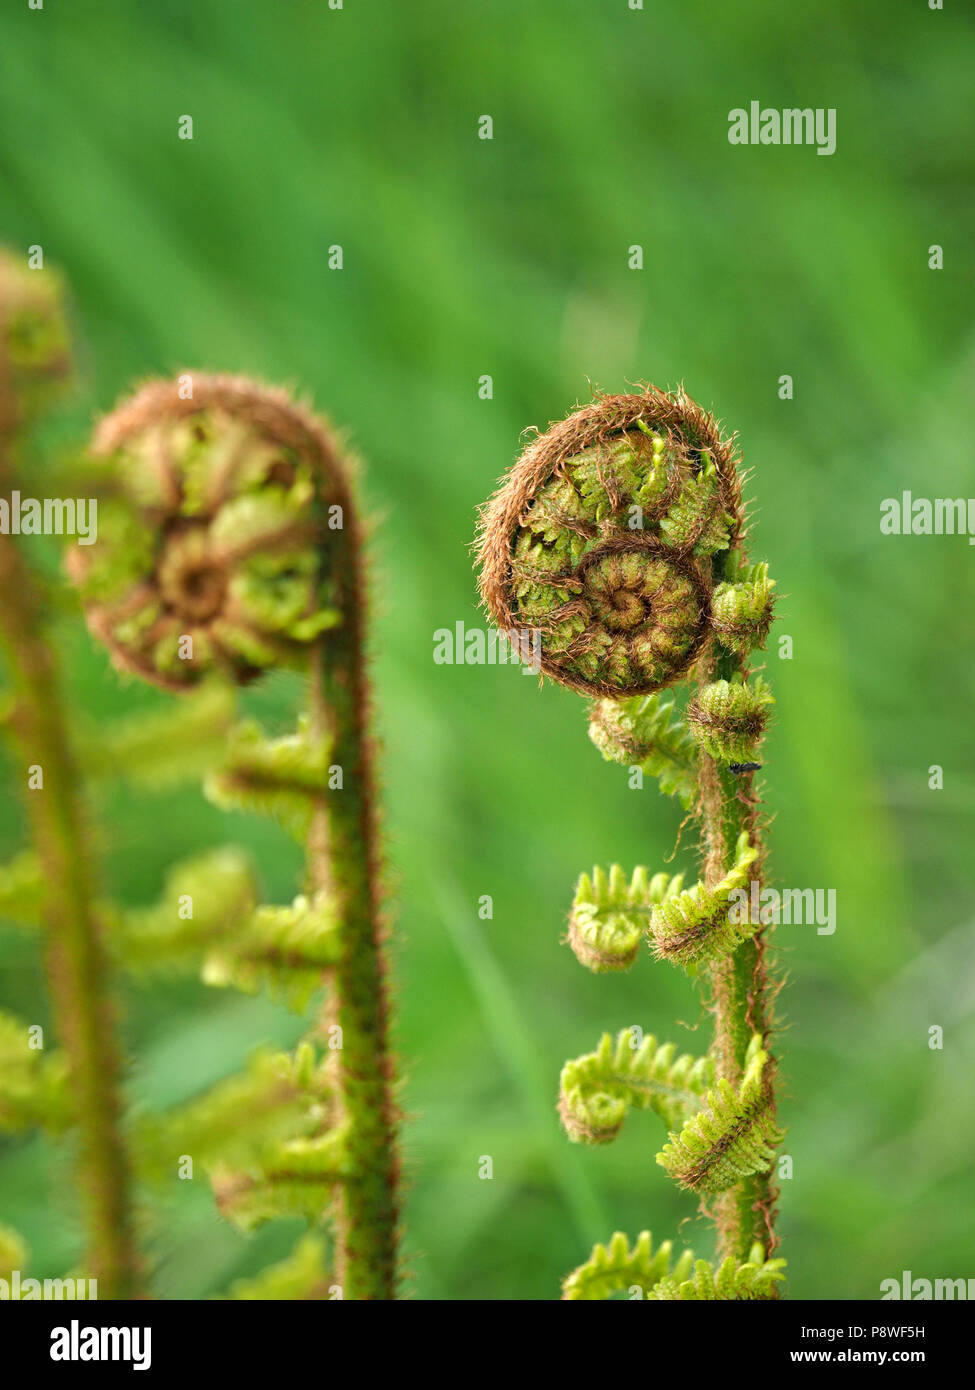 Unfurling golden fern leaf fronds,with wheel-like golden hairy curly tips and parallel upright stems in Eden Valley, Cumbria, England, UK Stock Photo